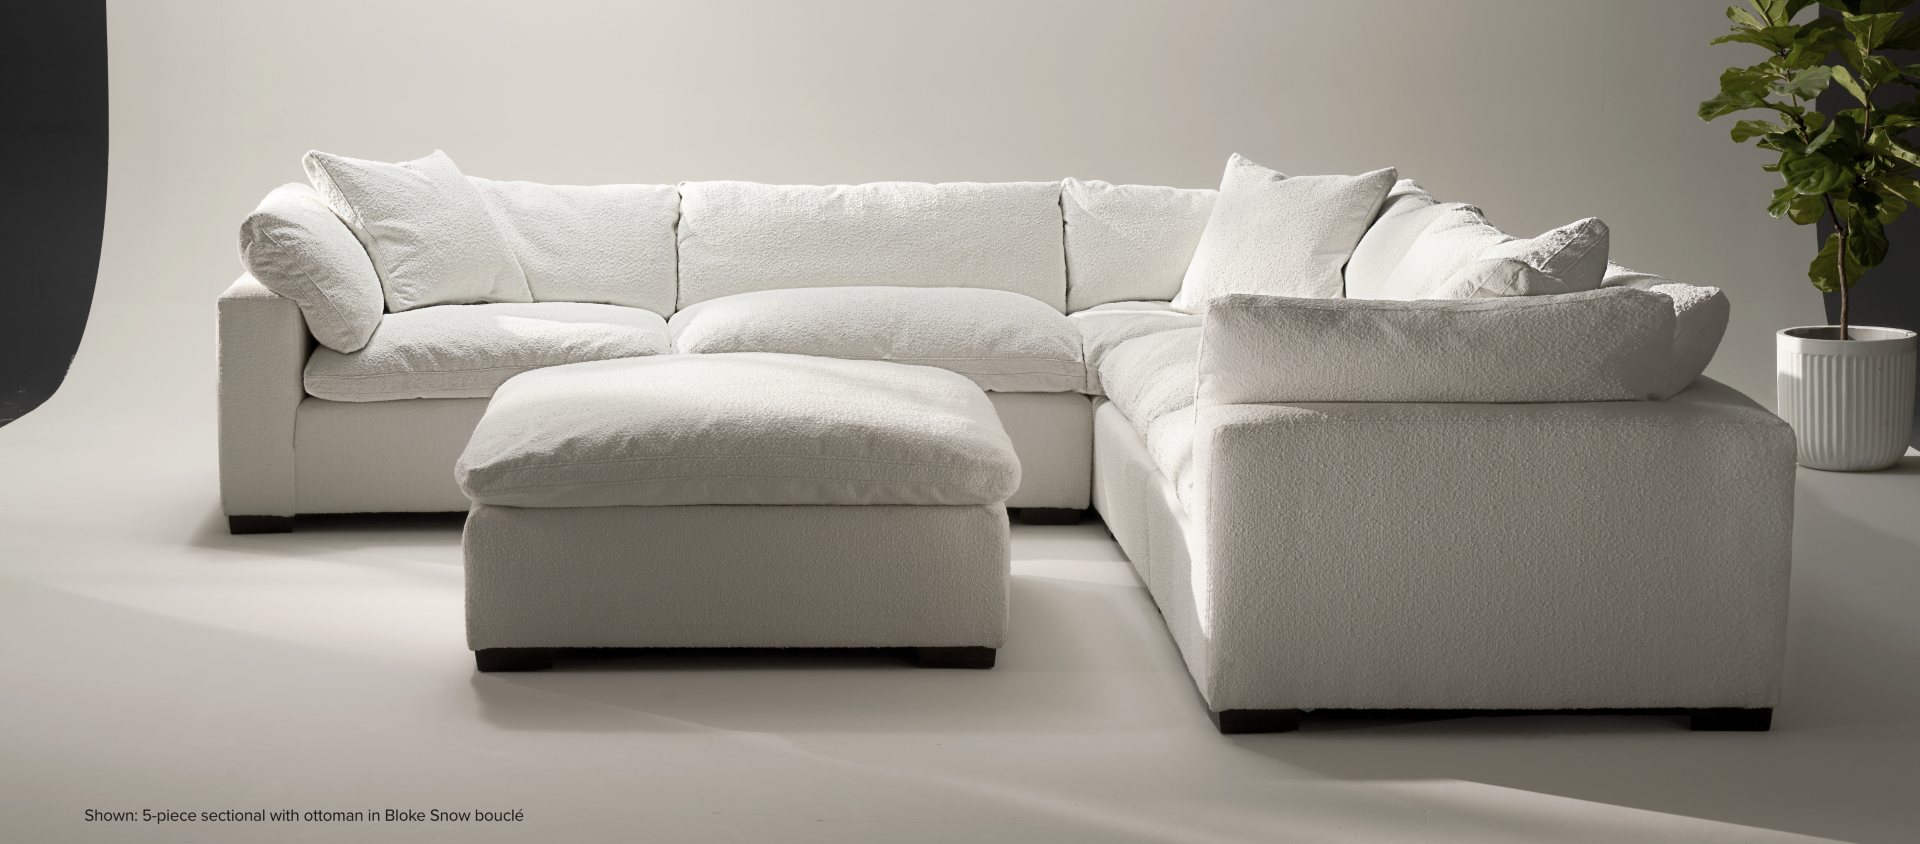 Plush 5-piece sectional with ottoman in bloke snow boucle